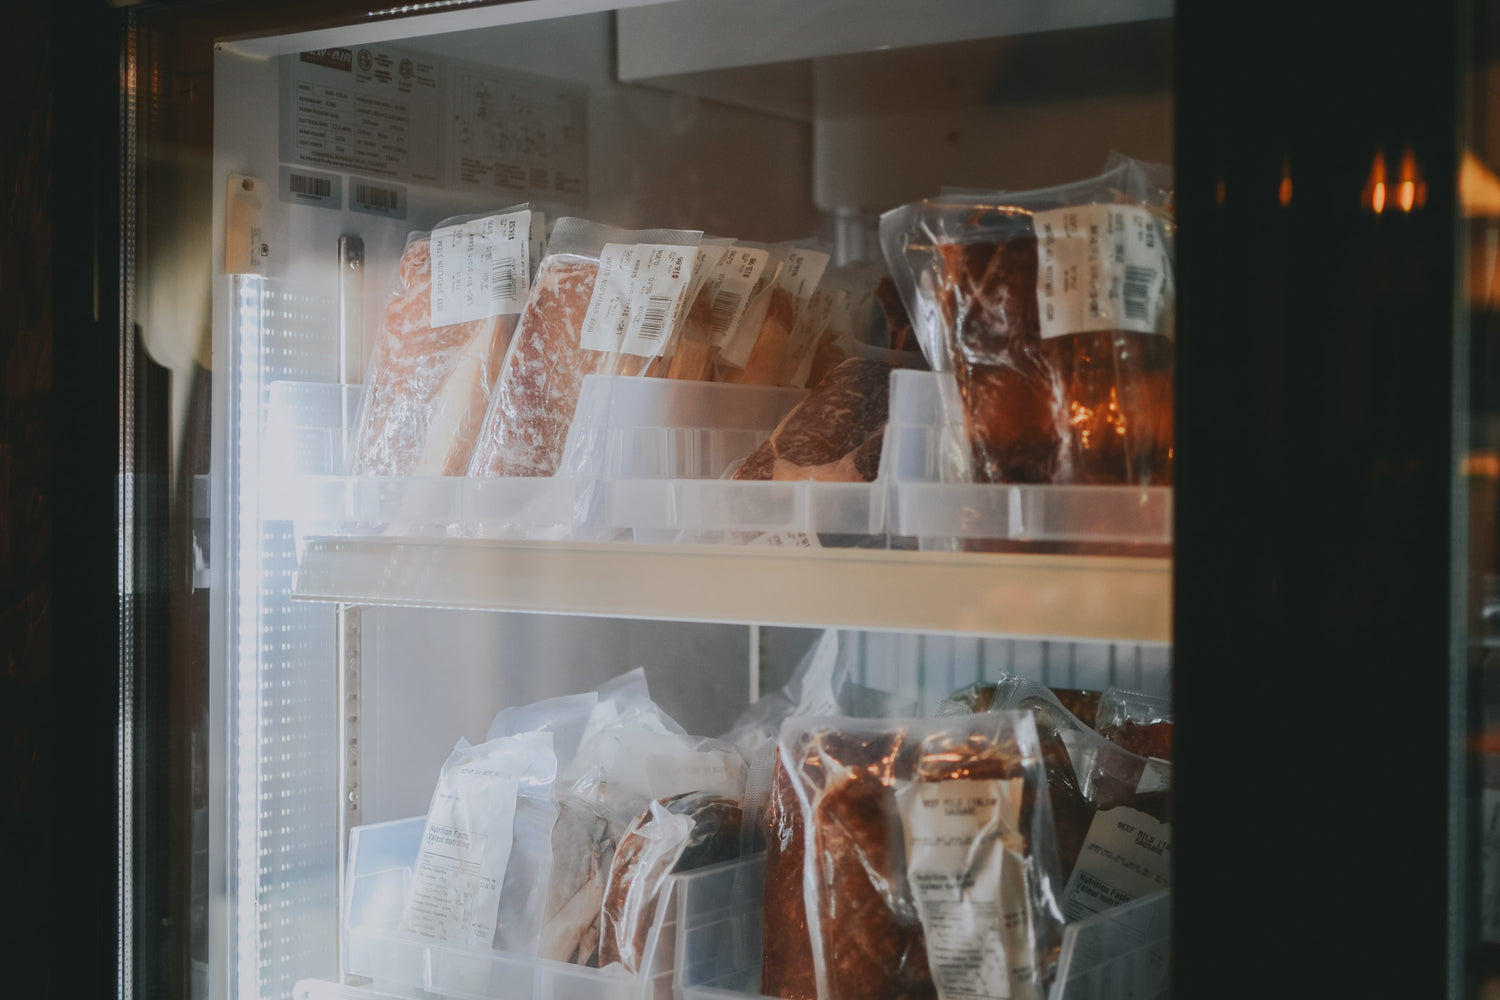 A freezer is stocked with all manner of beef cuts.